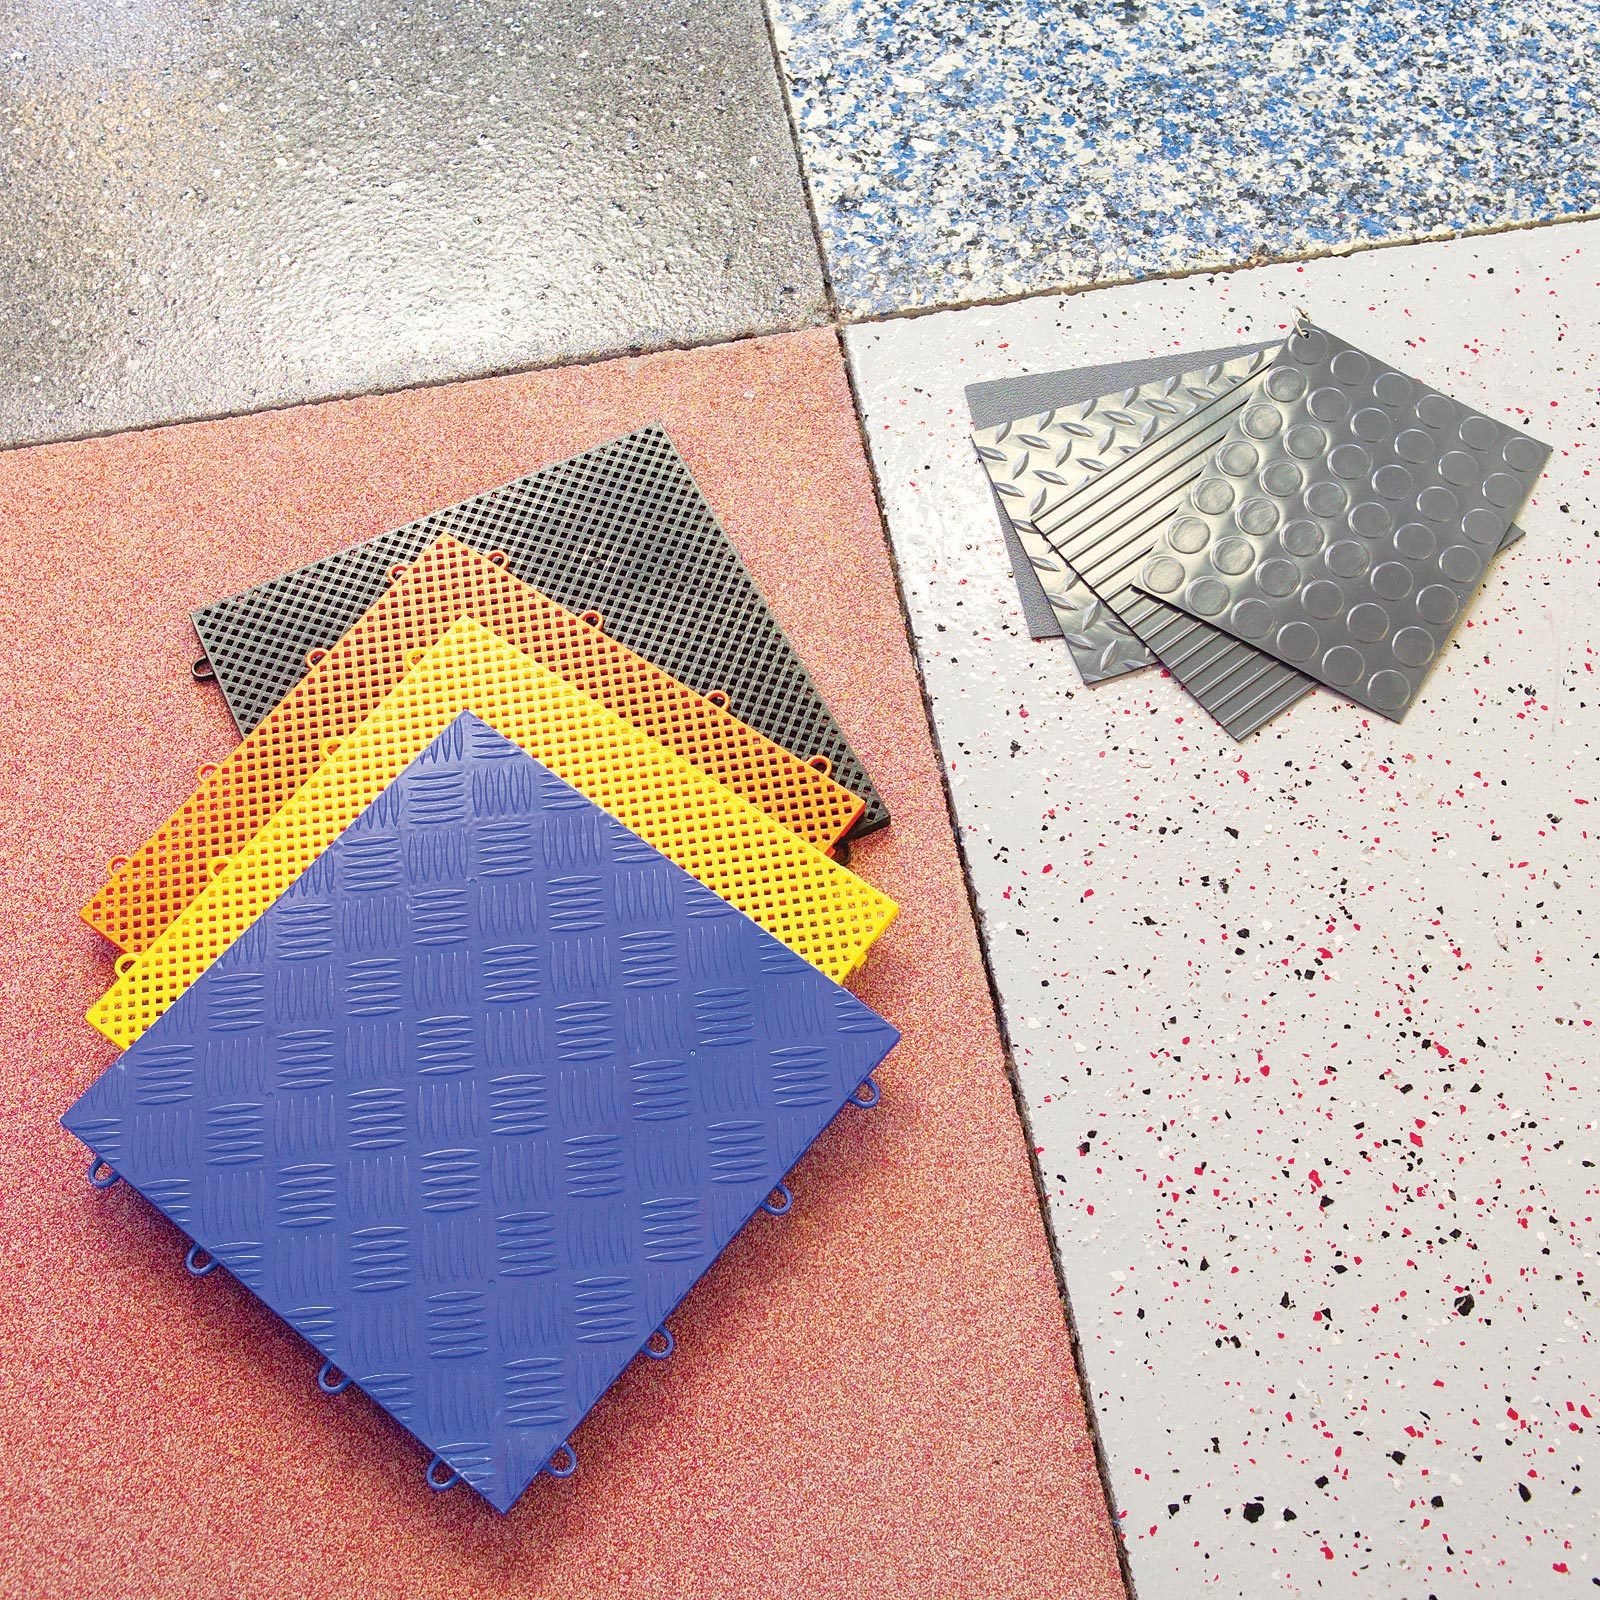 Top Workshop Floor Mat Products, Features and Options